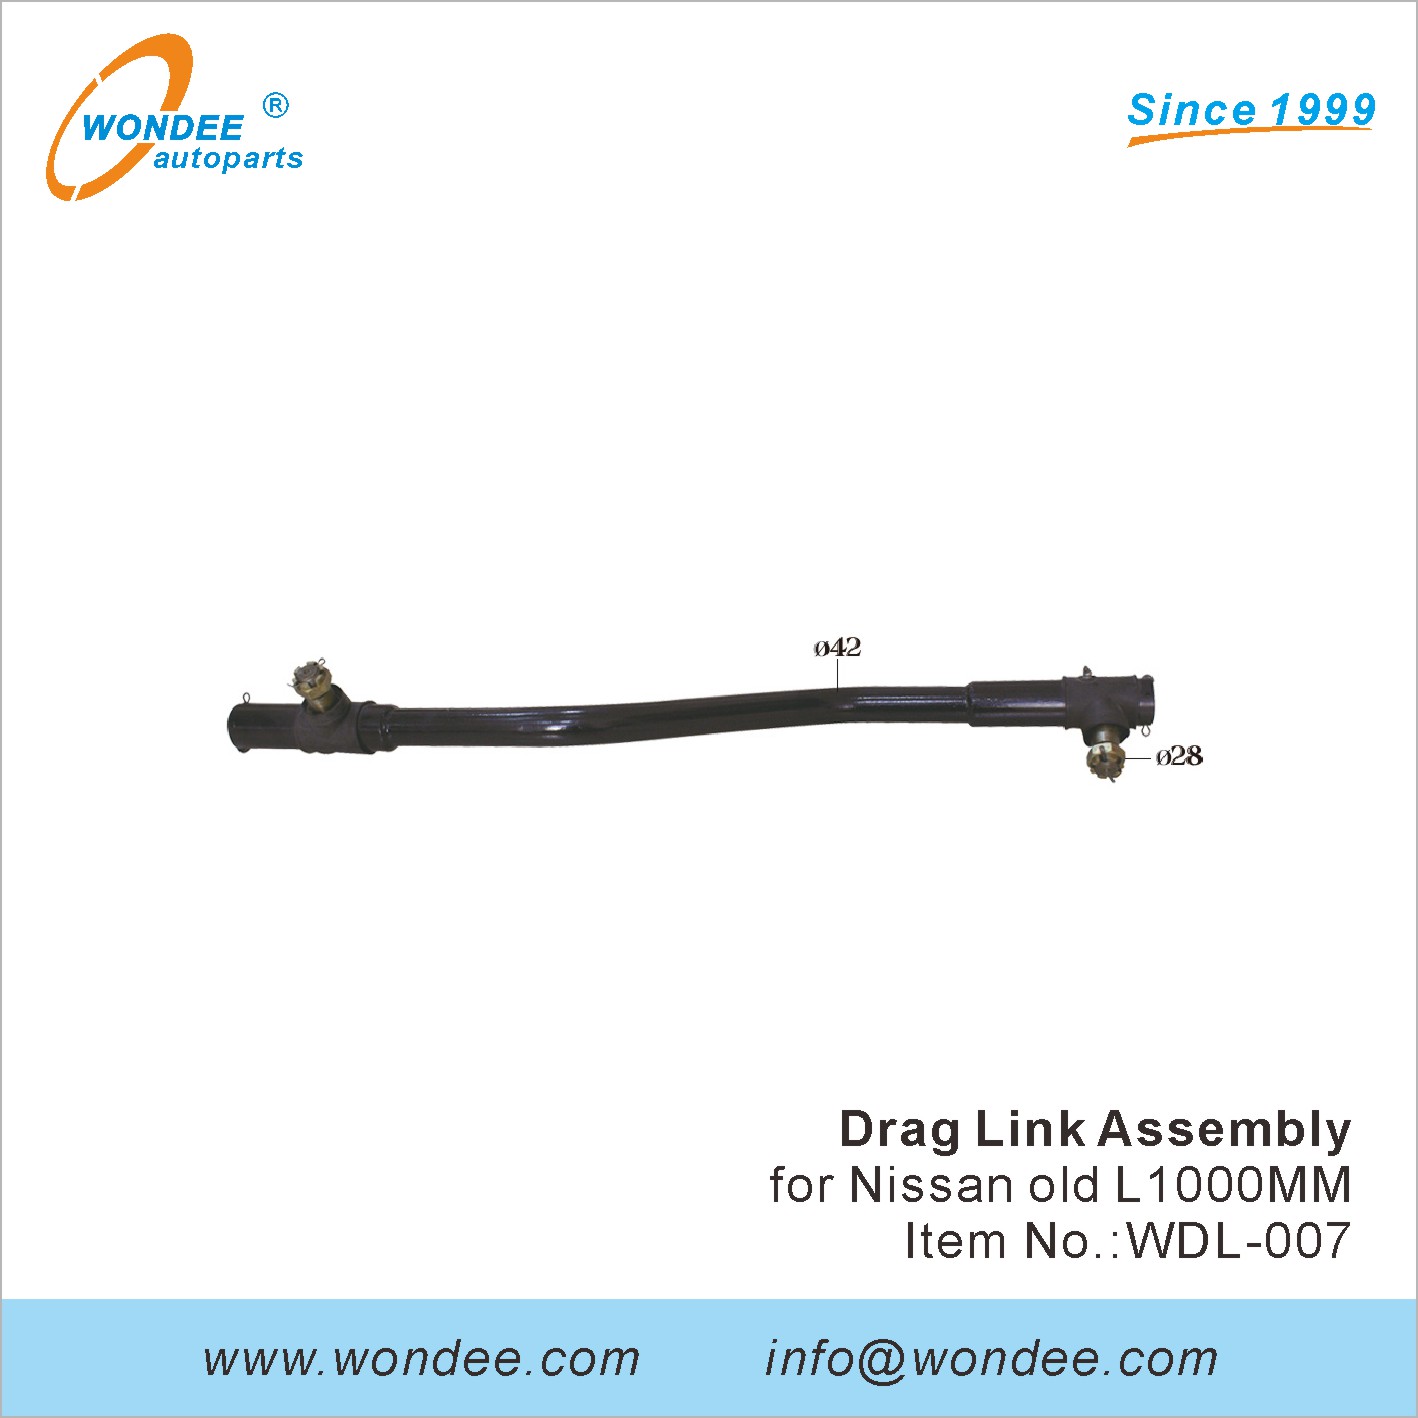 WONDEE drag link assembly (7)